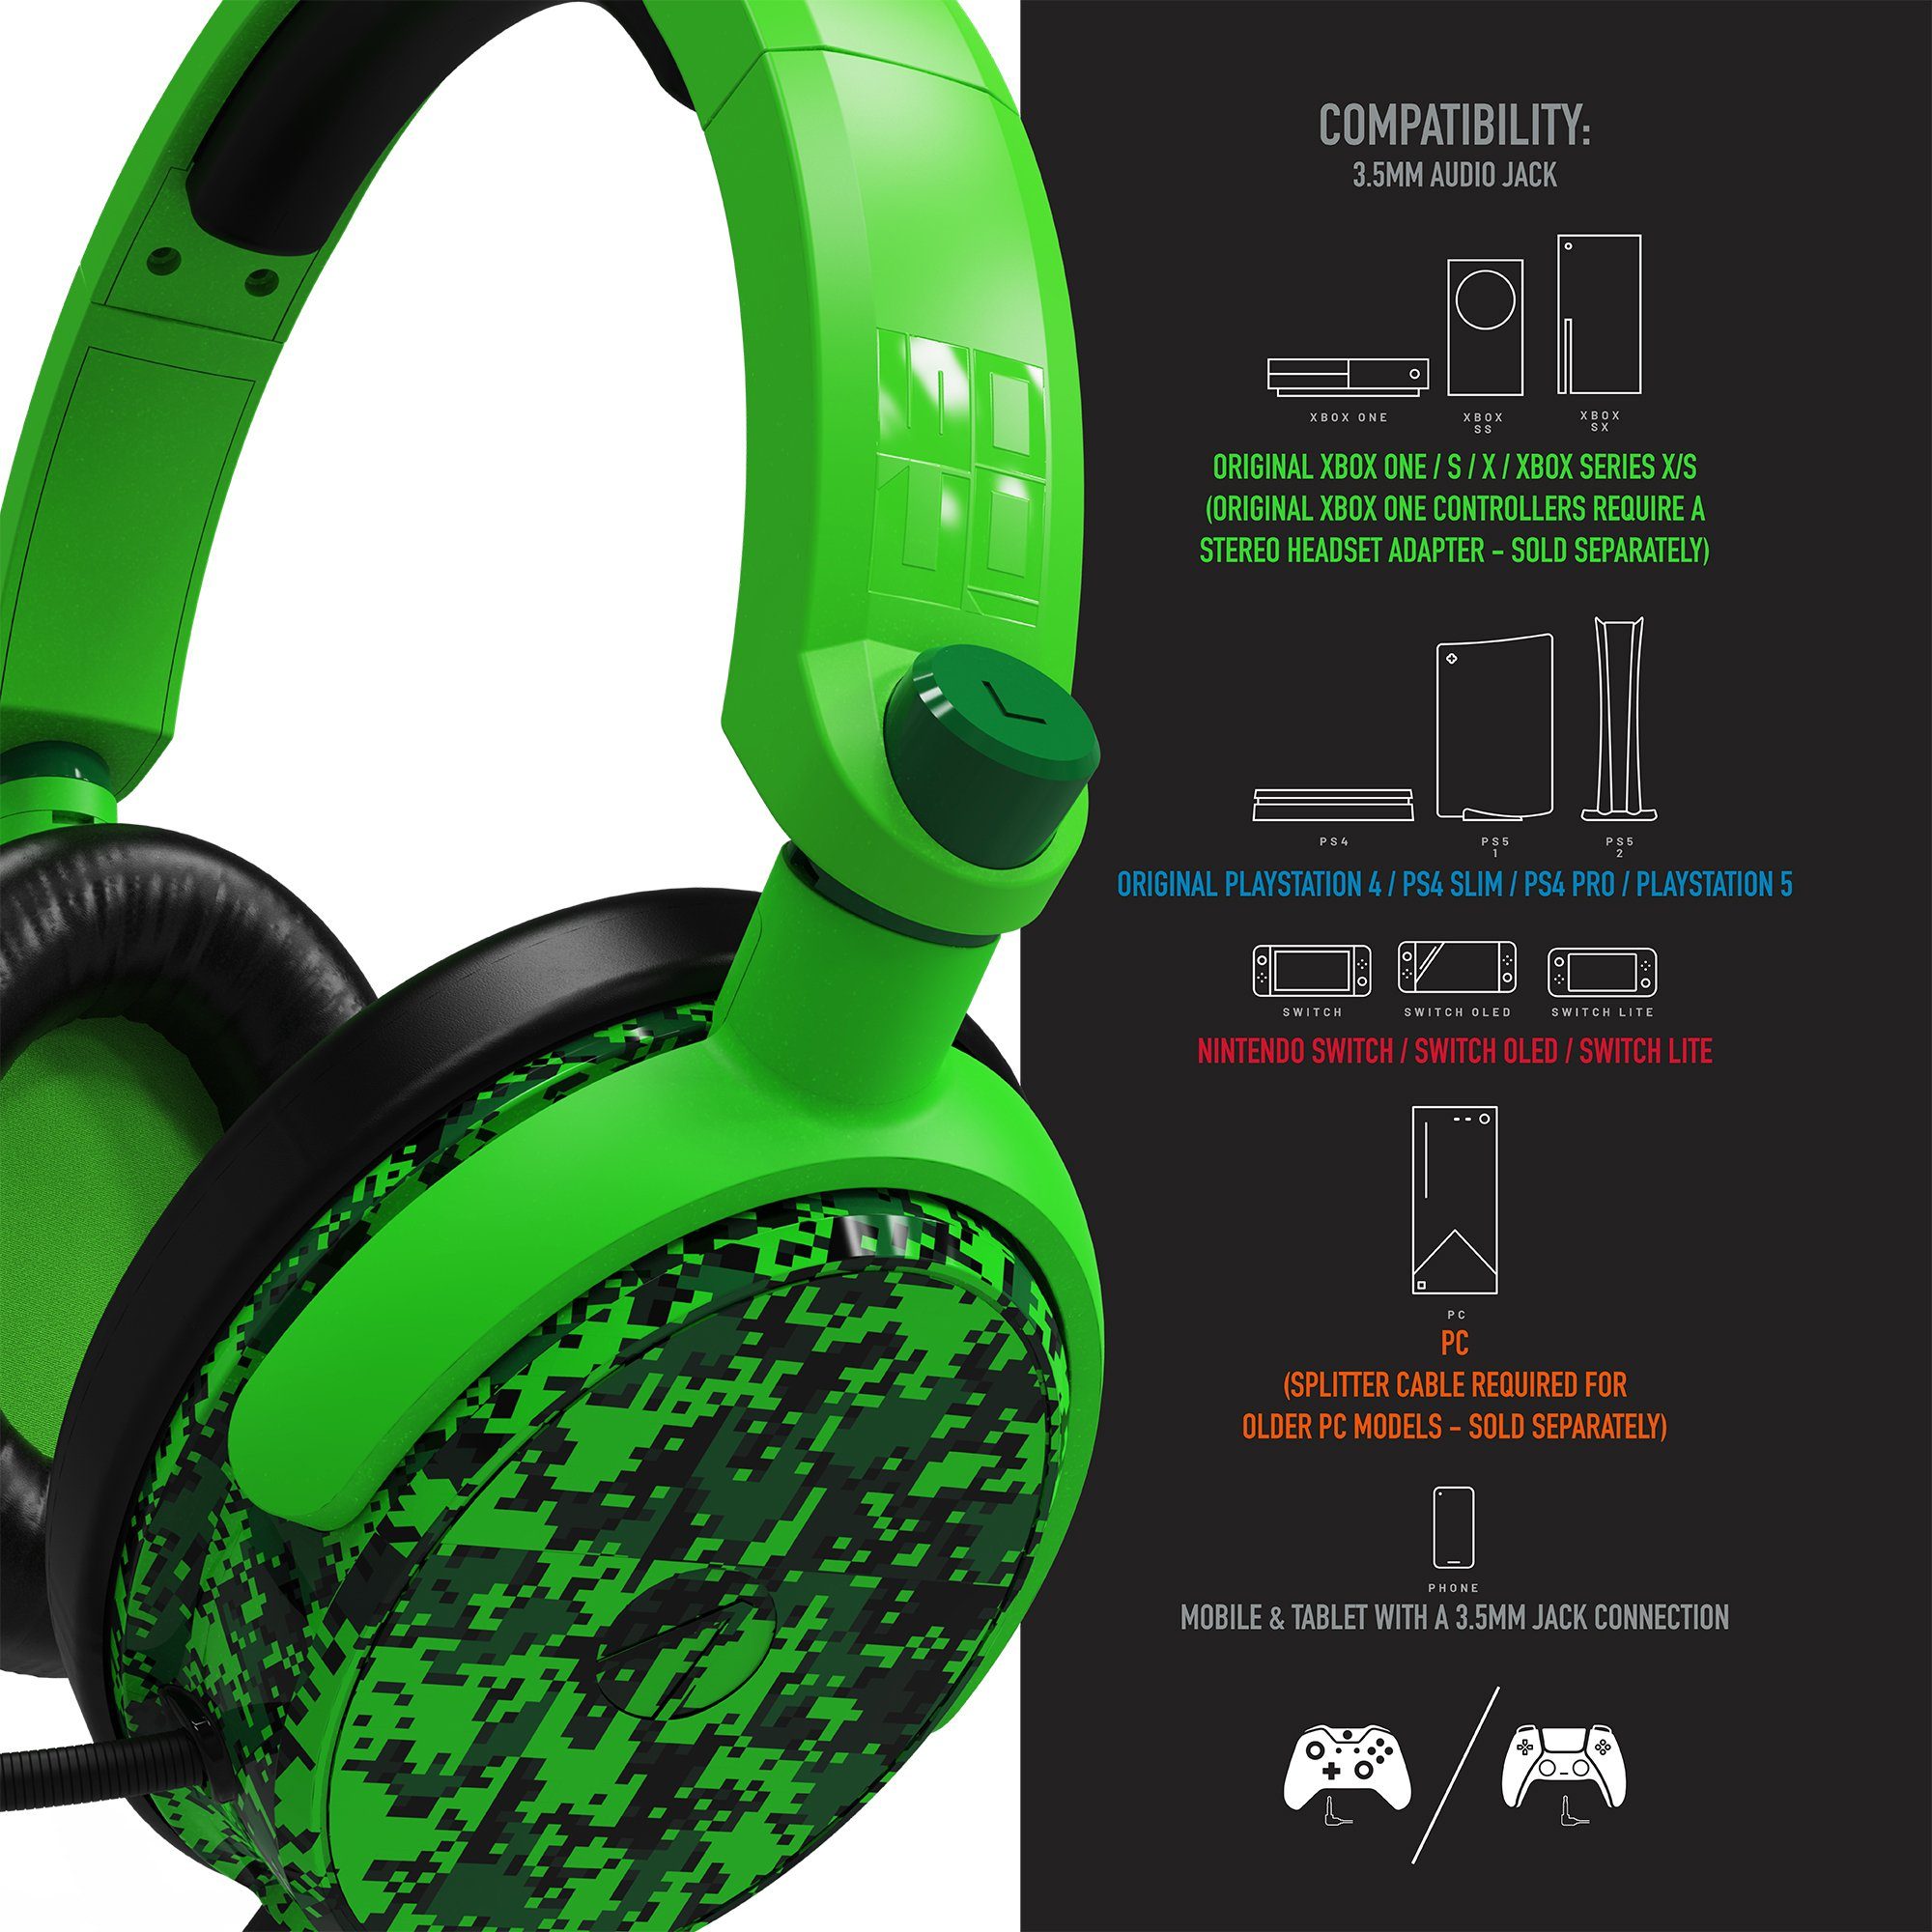 Stealth Multiformat Gaming camouflage Headset grün Camo C6-100 Gaming-Headset